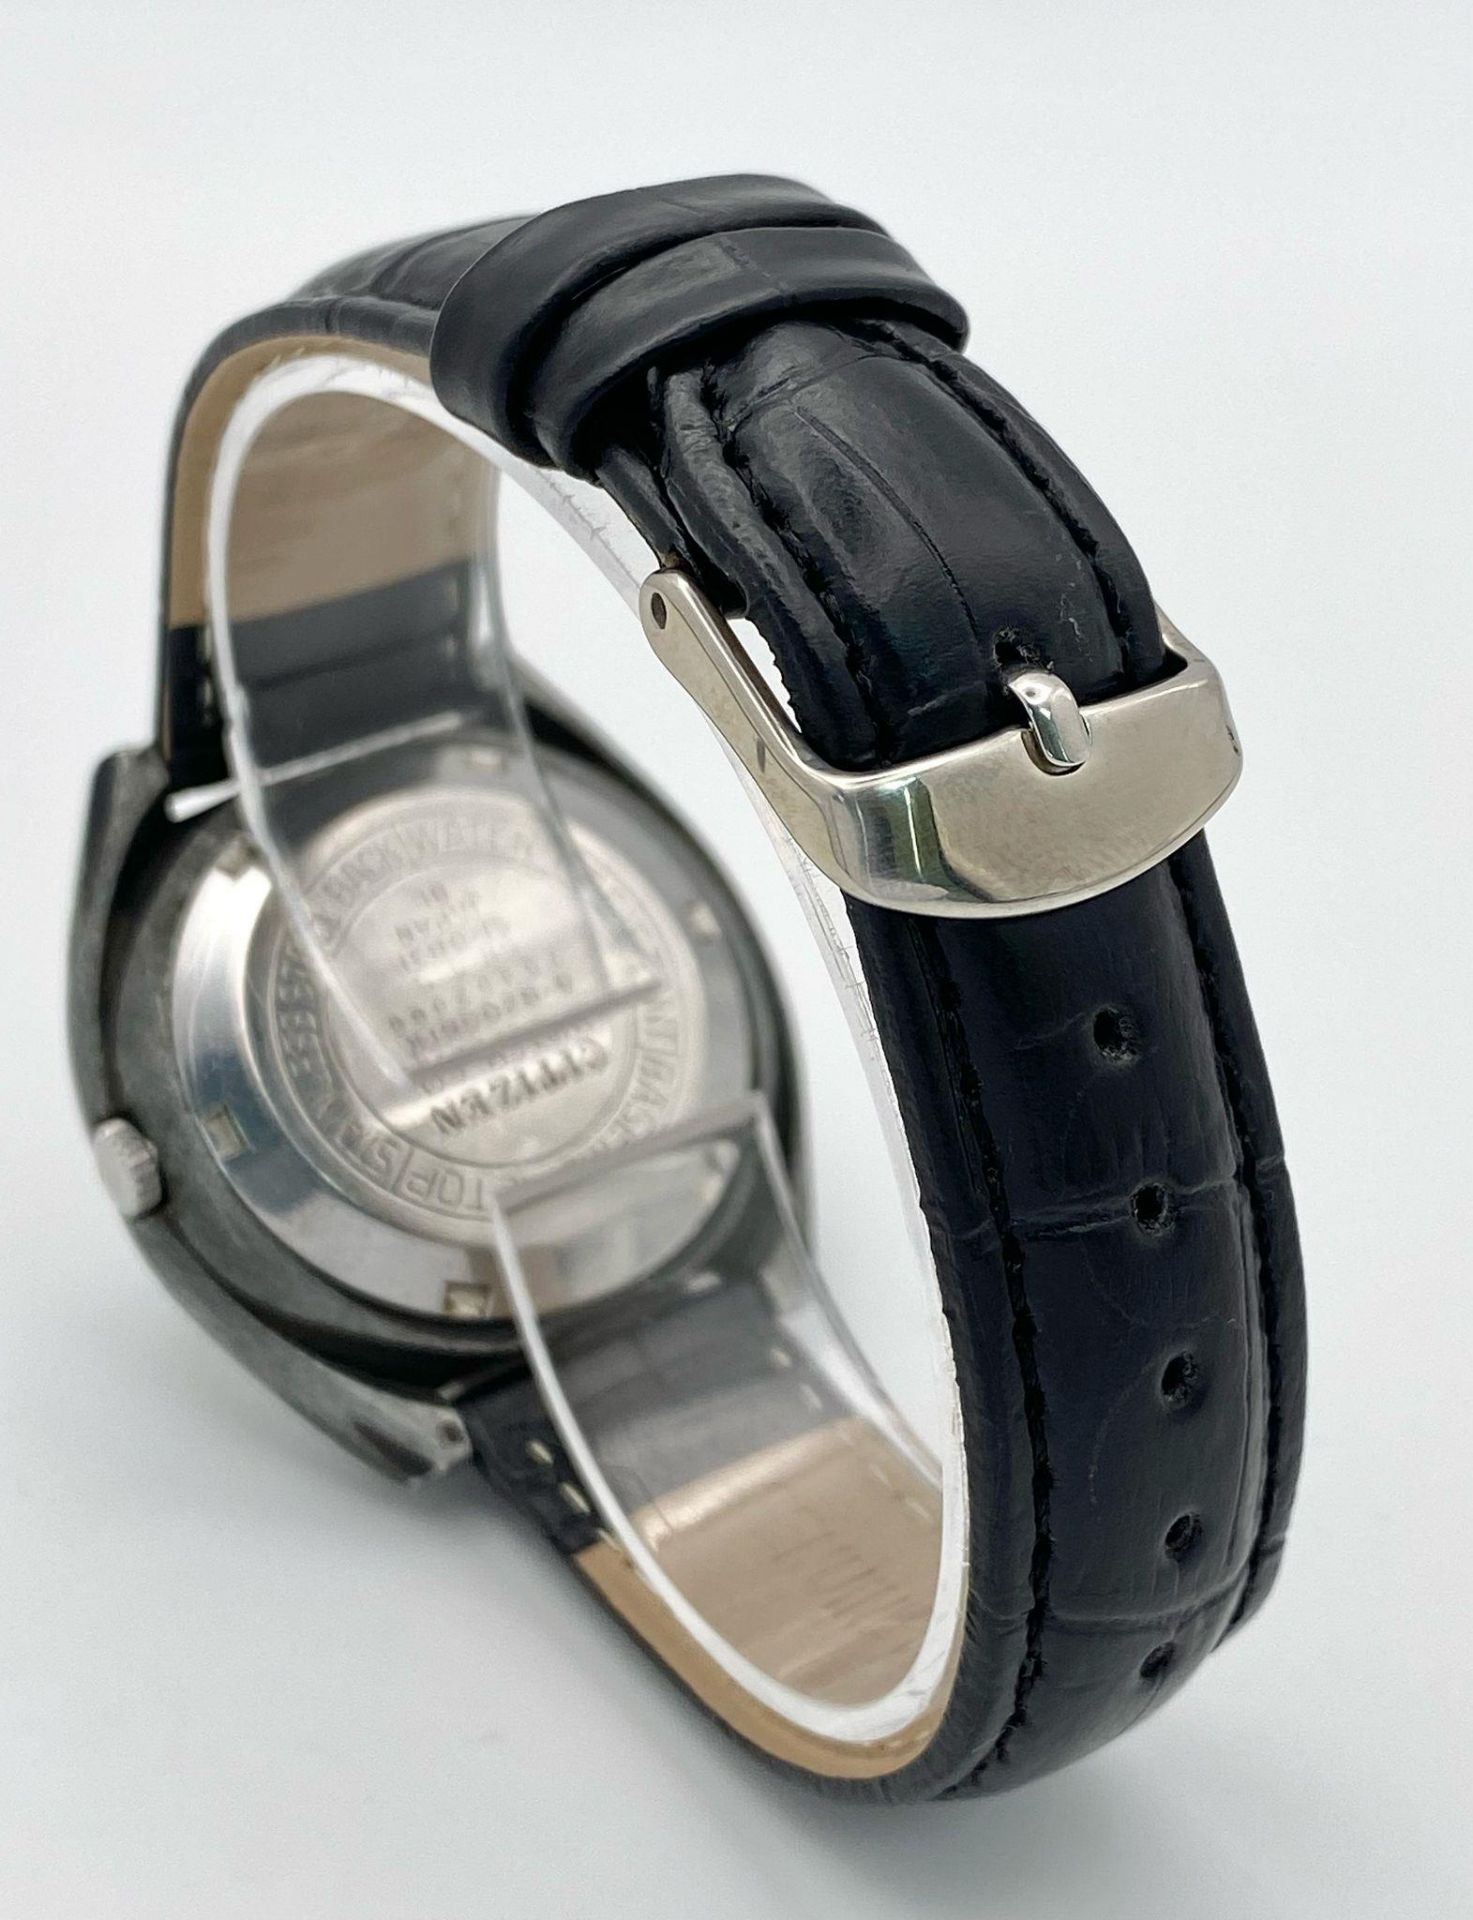 A Vintage Citizen 21 Jewels Automatic Gents Watch. Black leather strap. Black stainless steel case - - Image 5 of 7